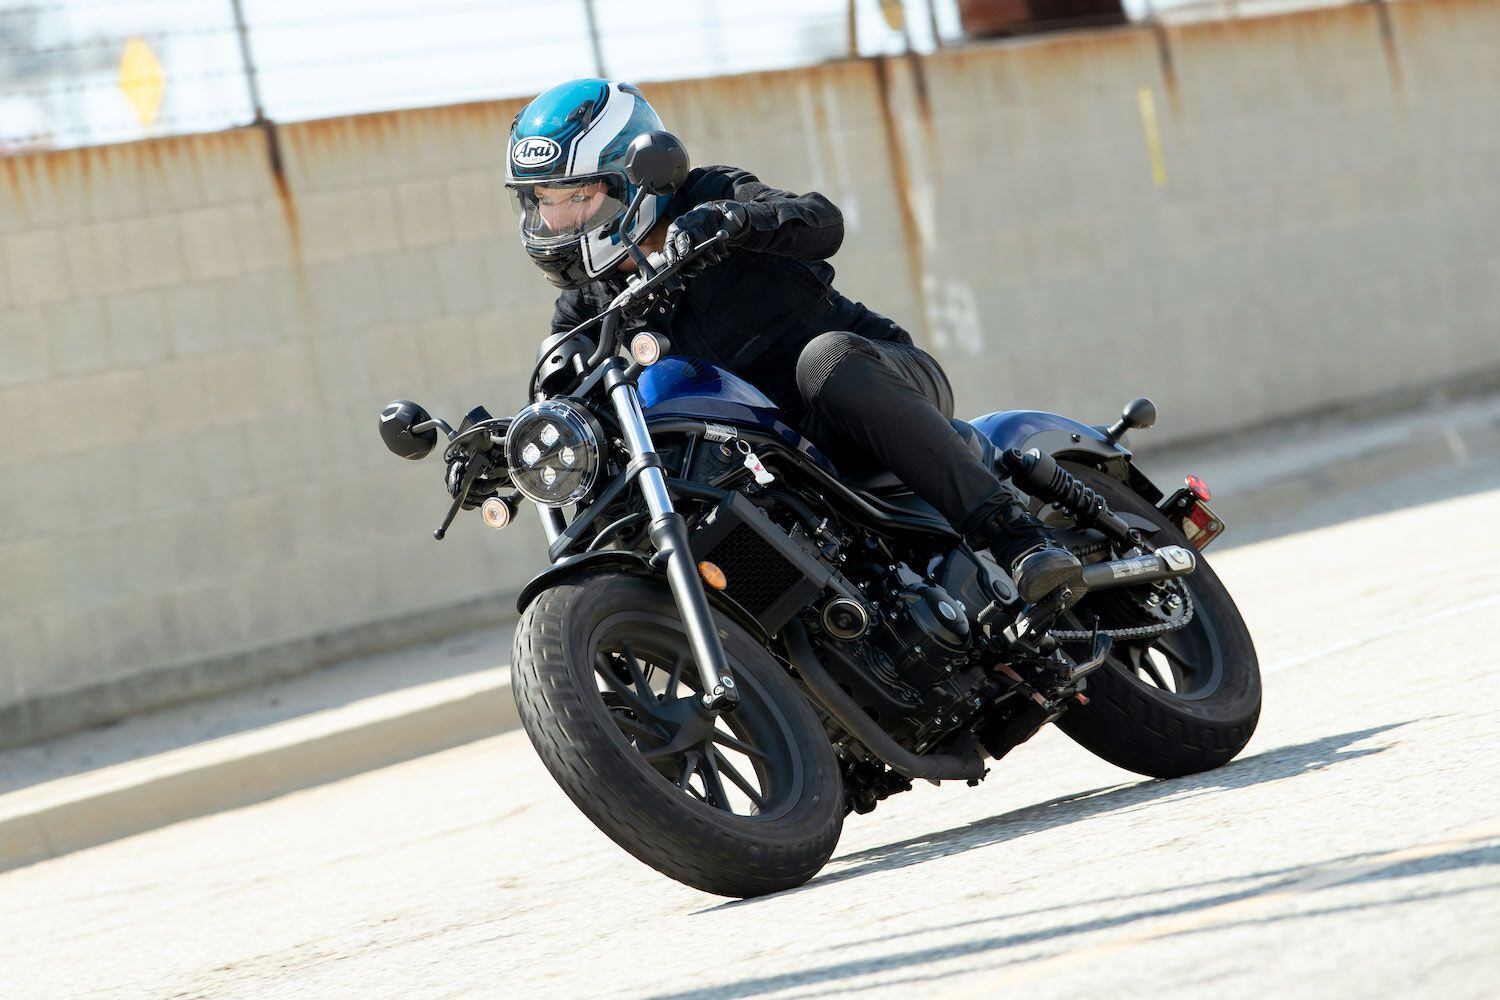 2021 Honda Rebel 300 ABS First Ride Review - MOTORCYCLE REVIEWS ...